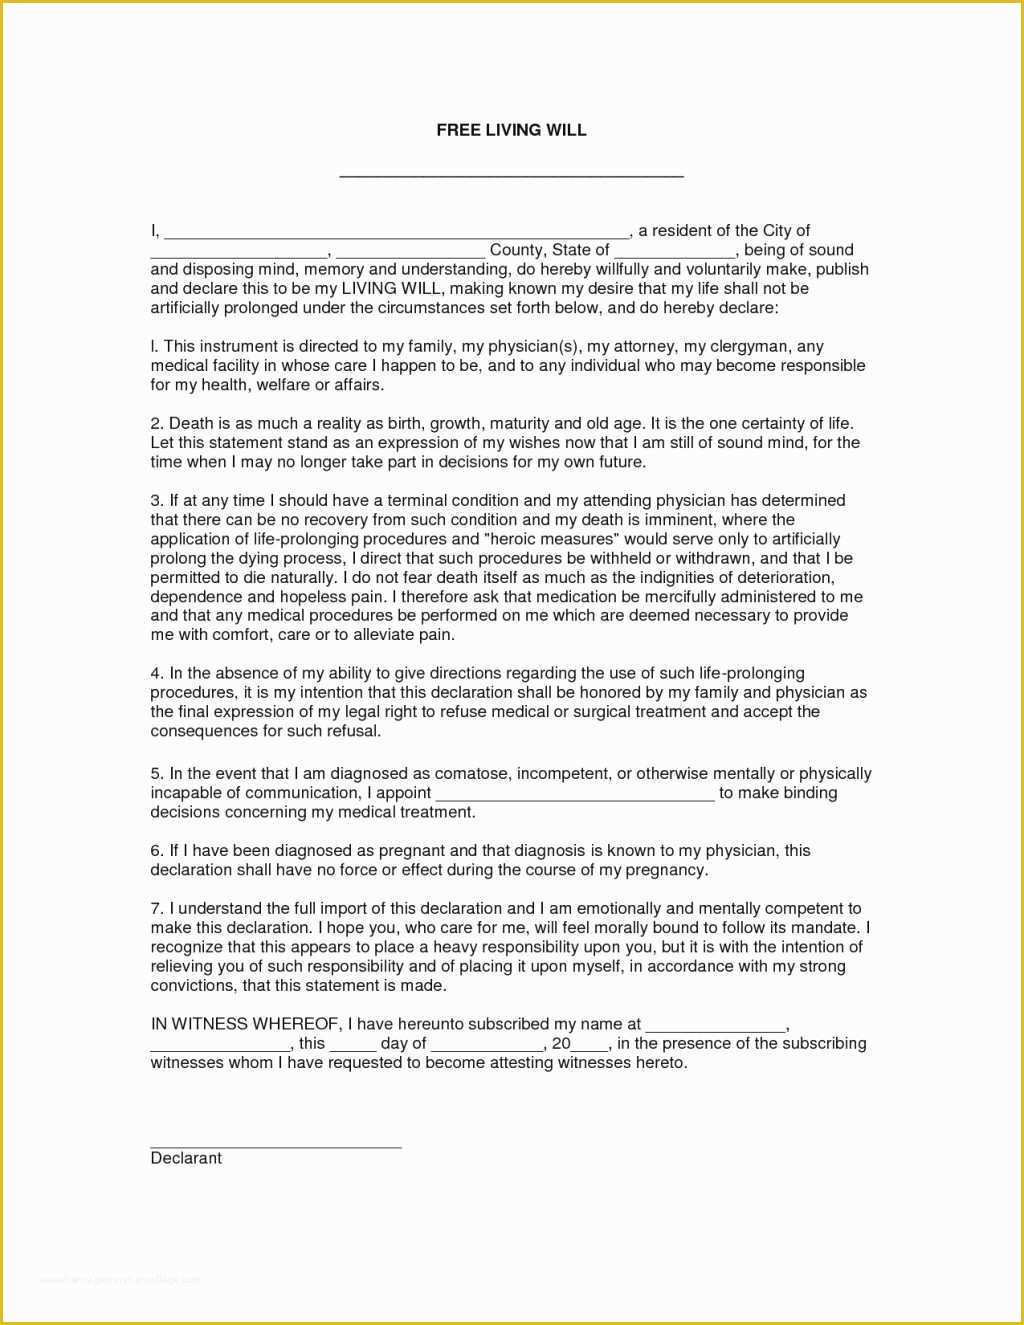 Free Last Will and Testament Template Microsoft Word Of Fresh Last Will and Testament Template Microsoft Word Uk